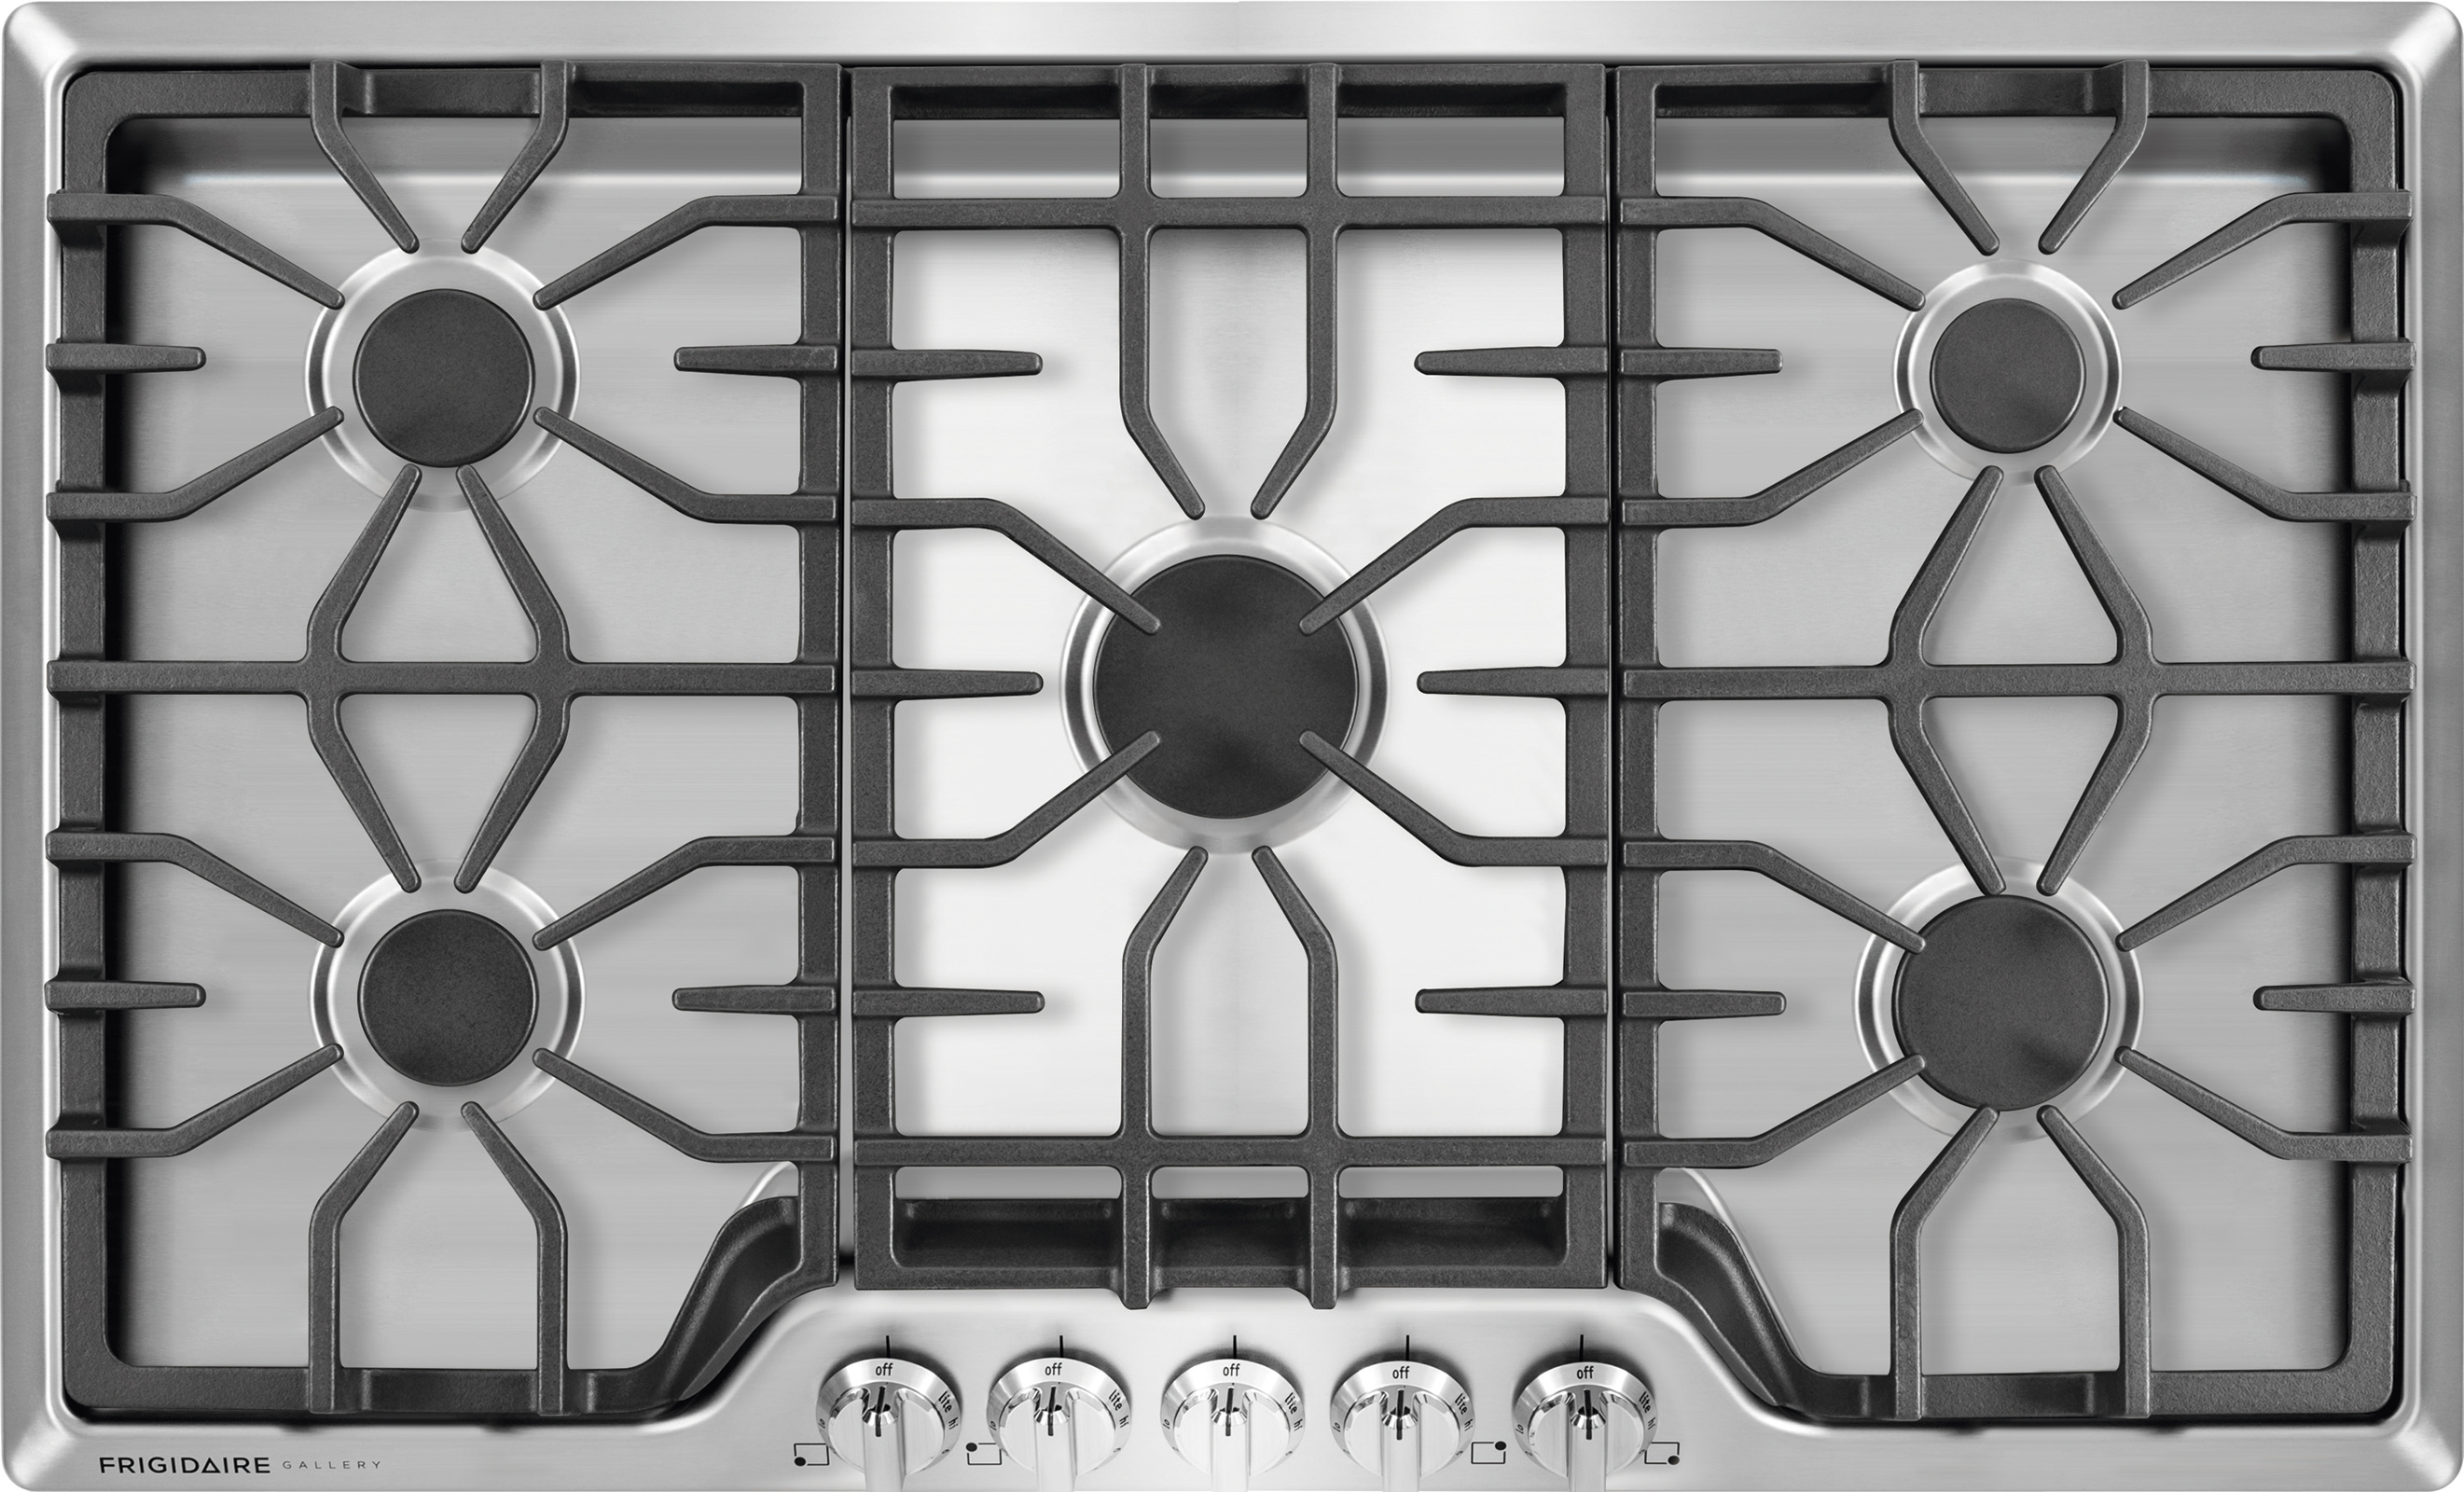 Frigidaire Gallery FGGC3645QS 36'' Gas Cooktop - Stainless Steel